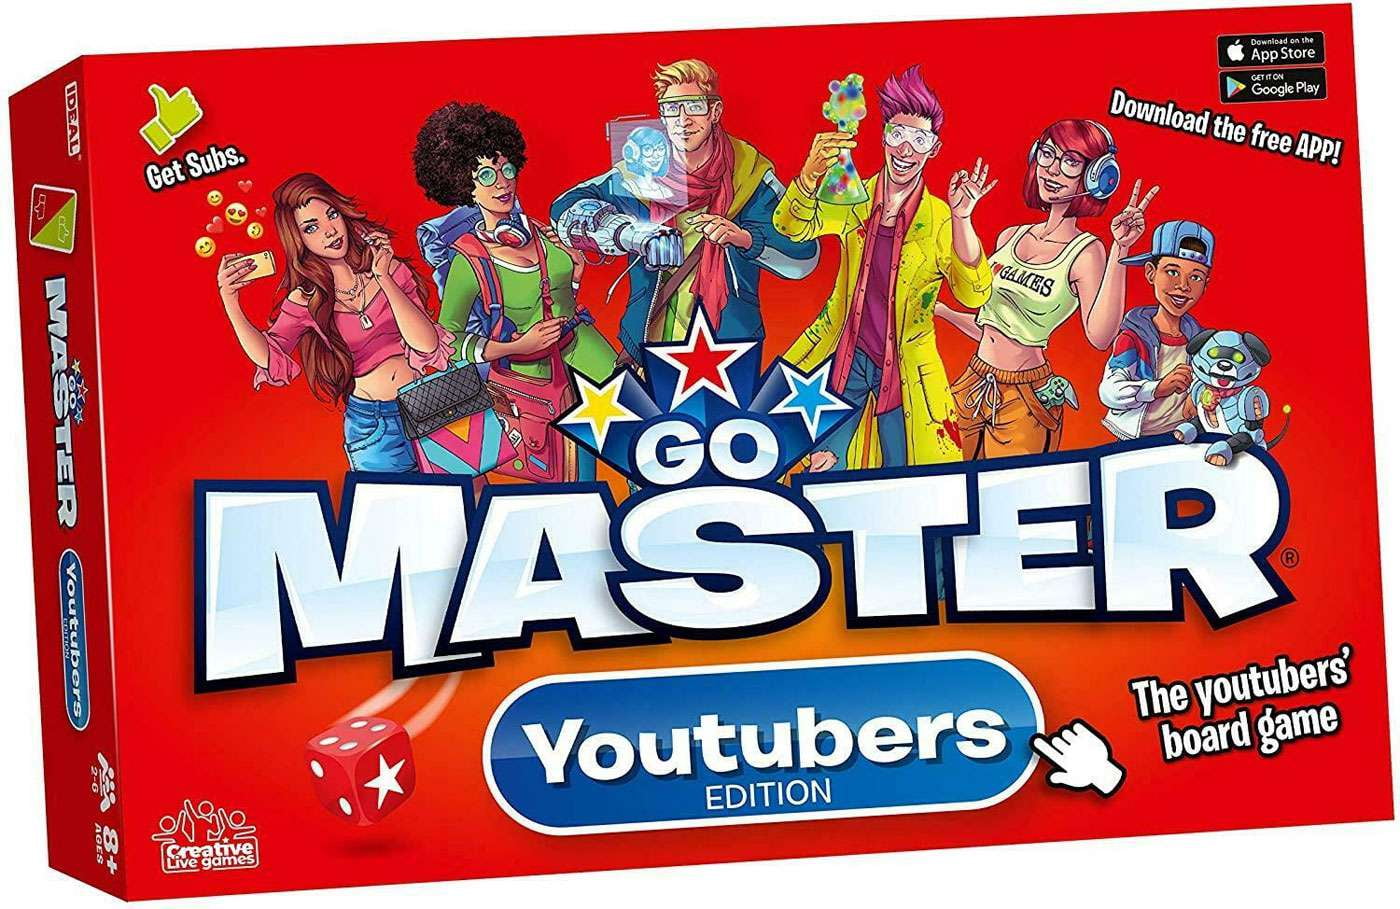 Go Master rs Edition Board Game Become a Social Influencer 2 Players